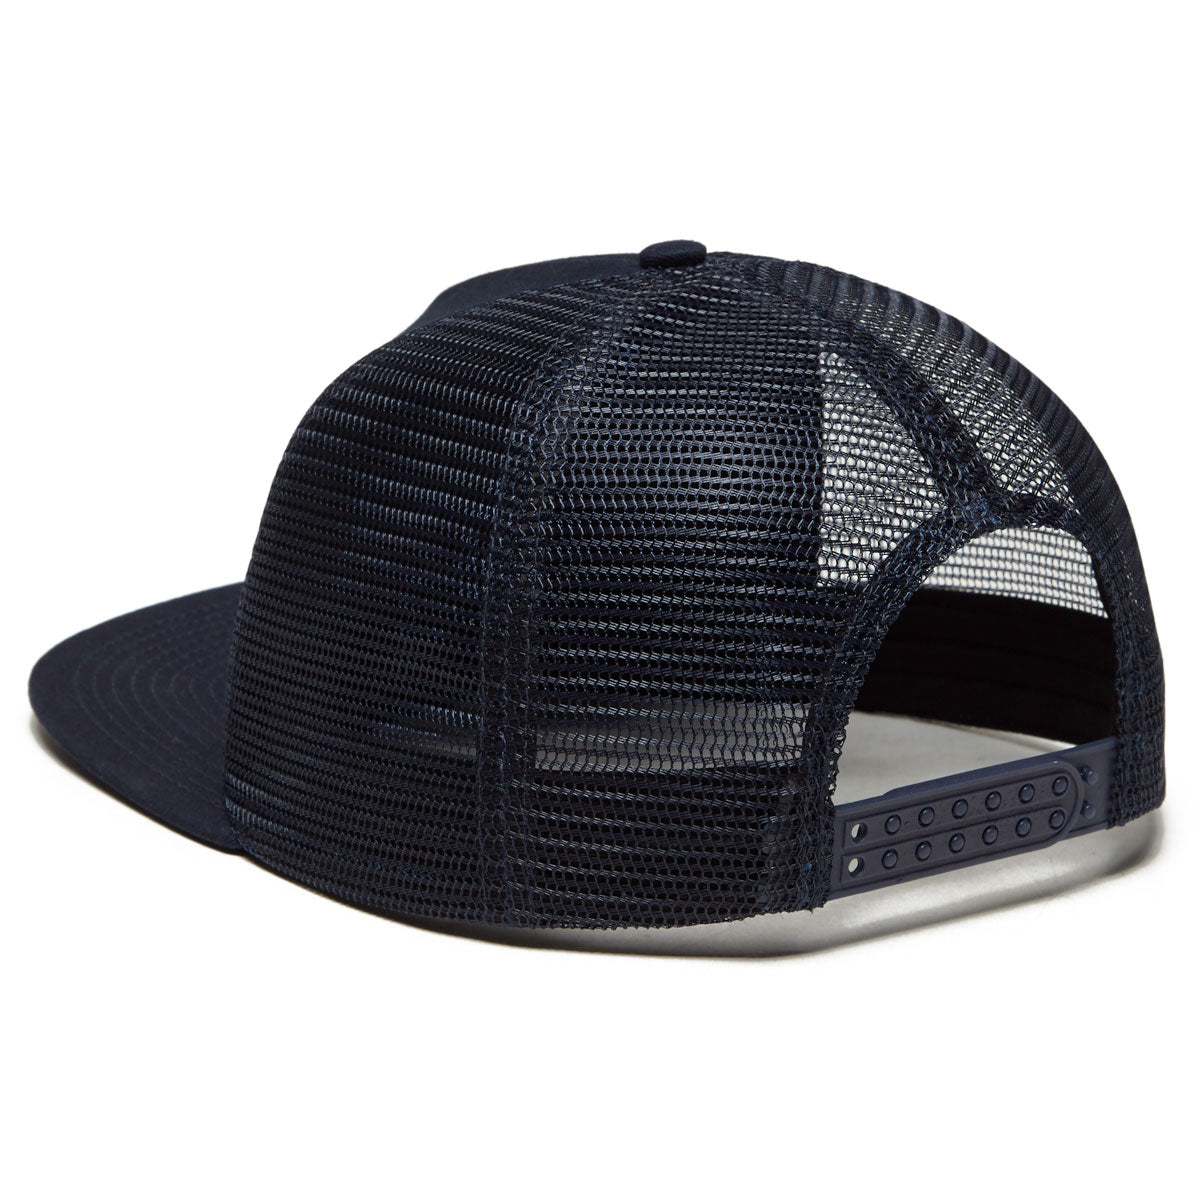 Thrasher Embroidered Outlined Mesh Hat - Navy image 2